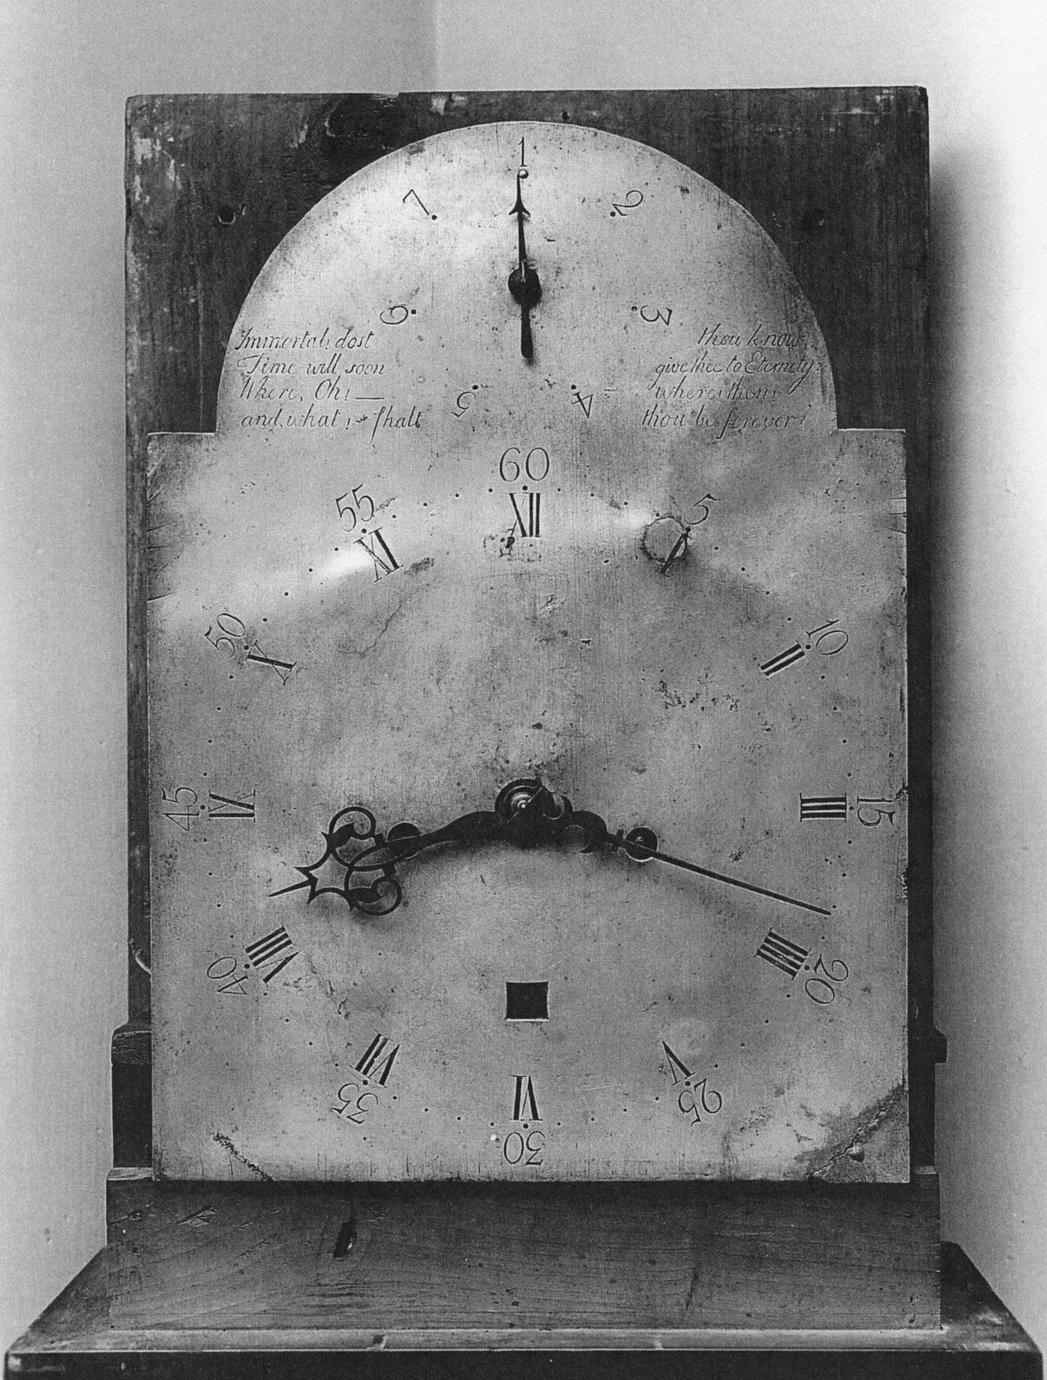 Black and white photograph of an eight-day, strike and repeater clock.